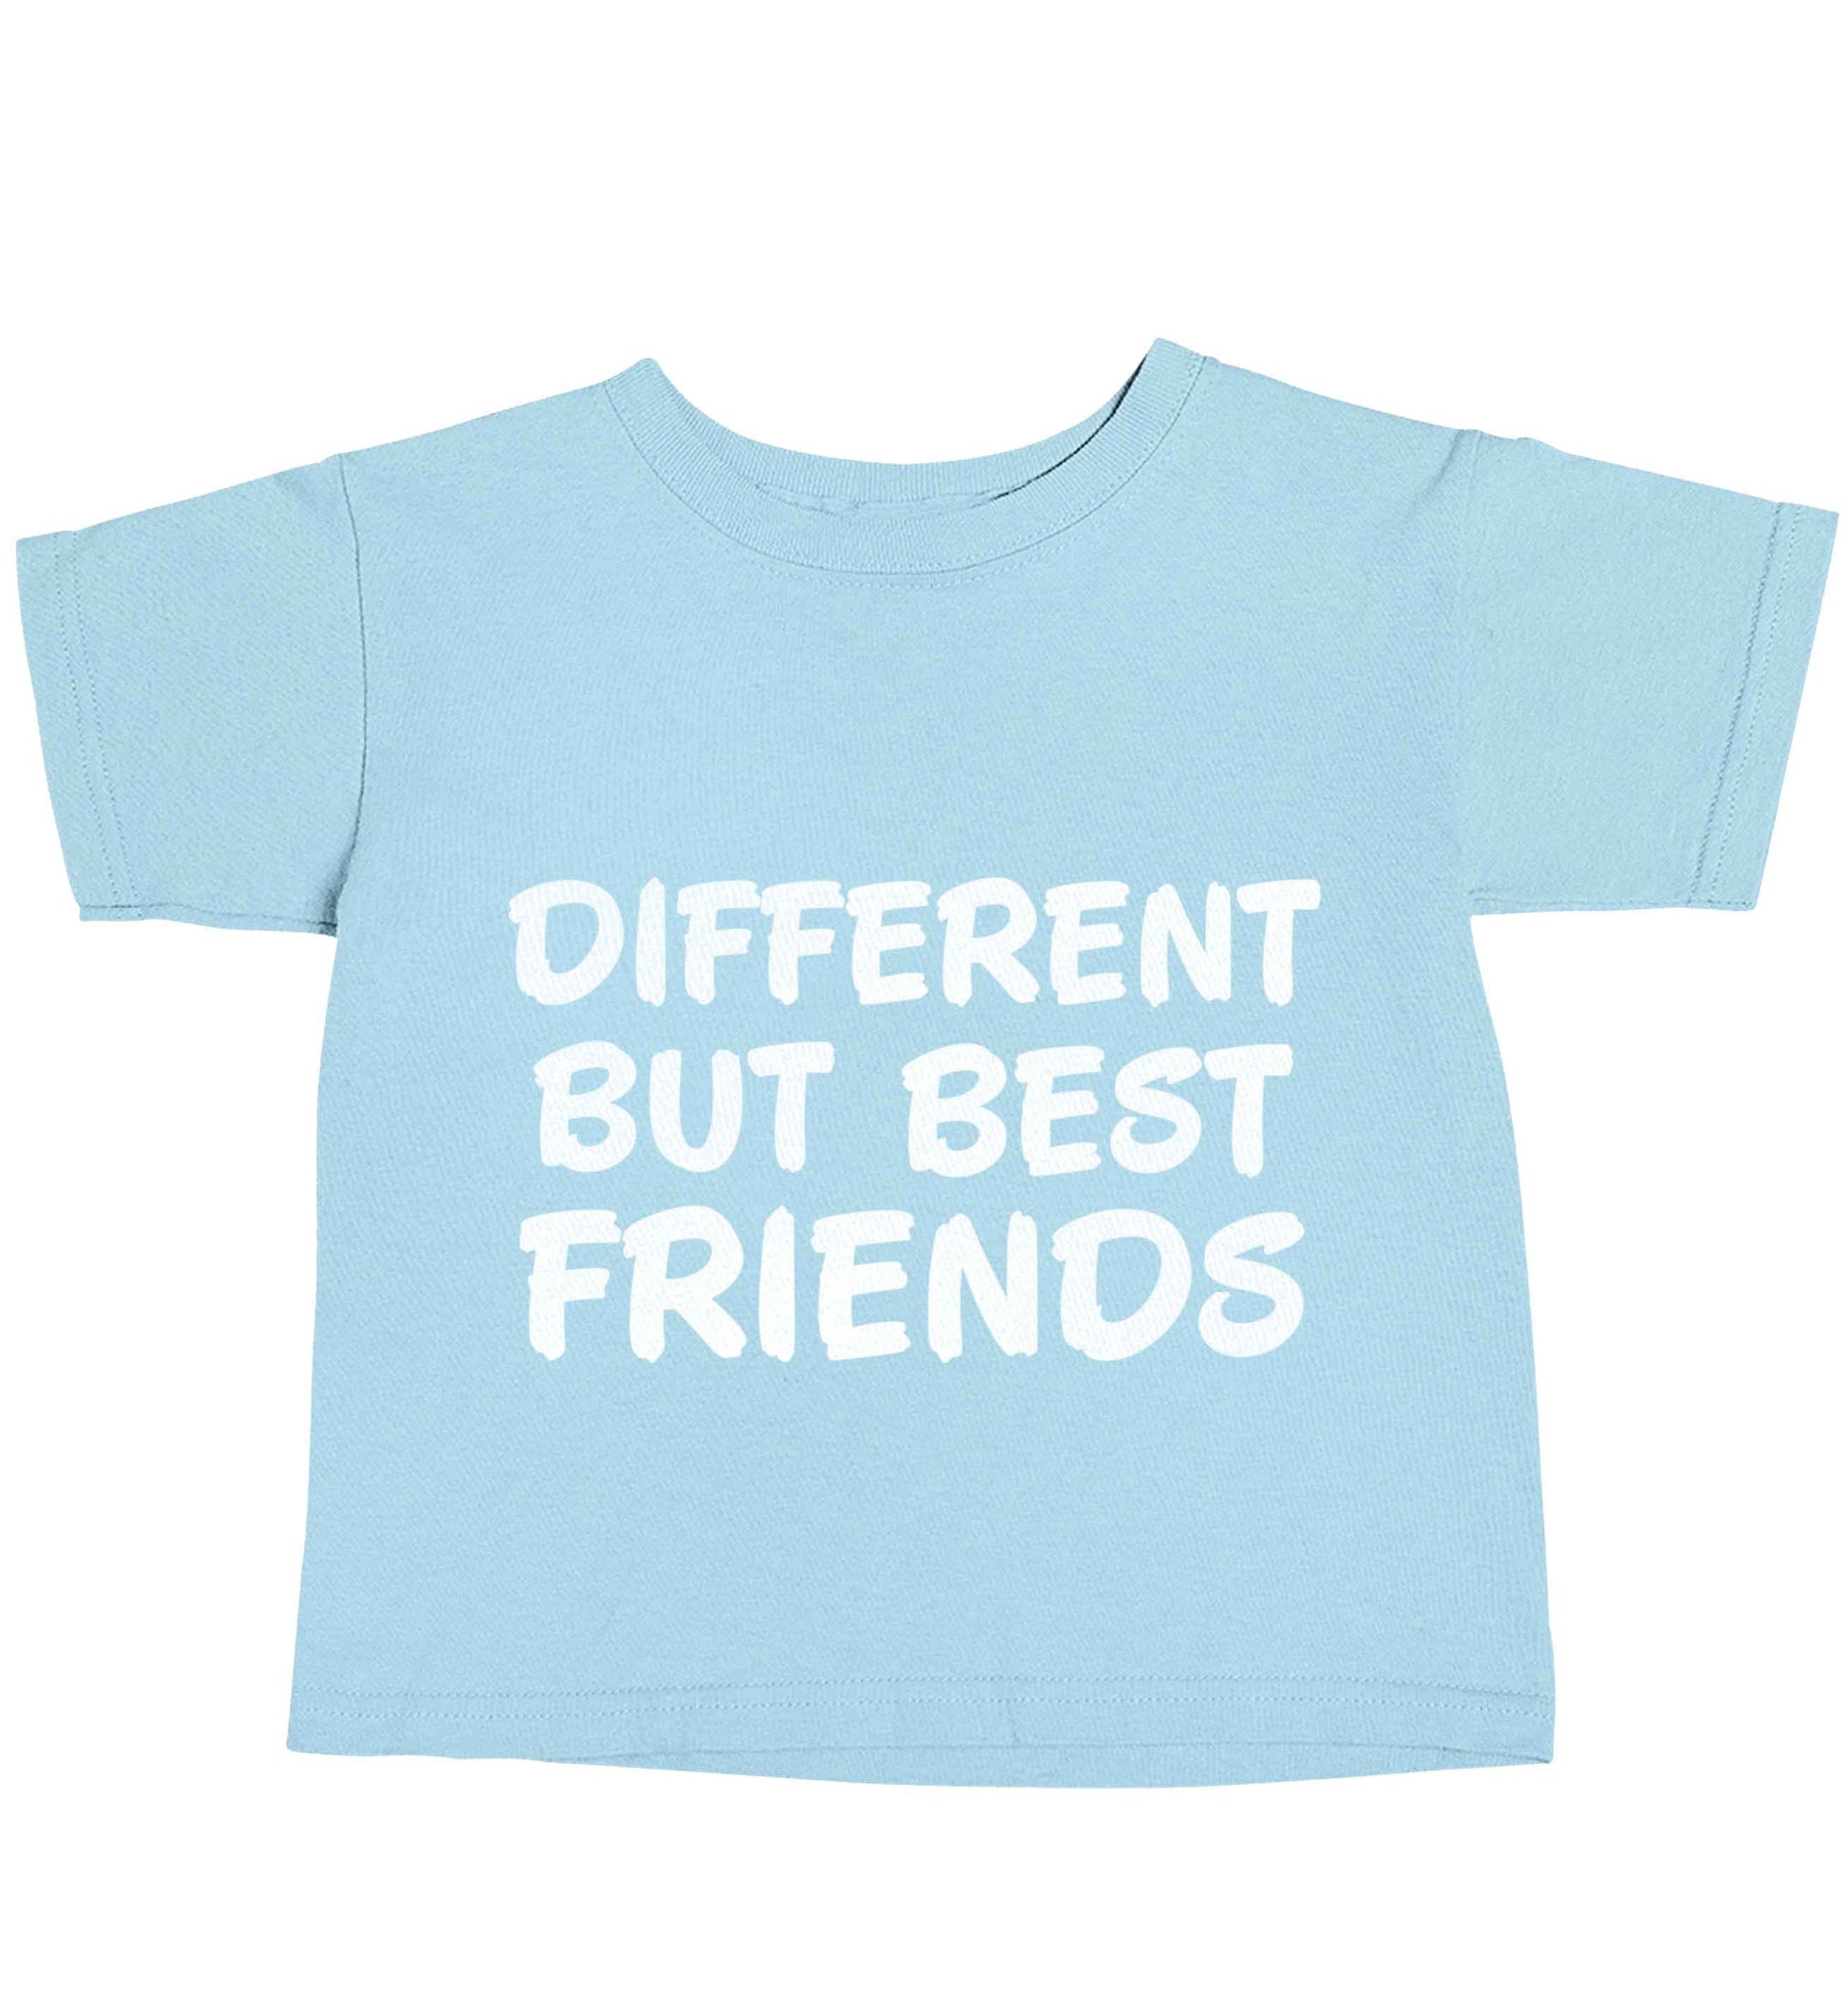 Different but best friends light blue baby toddler Tshirt 2 Years